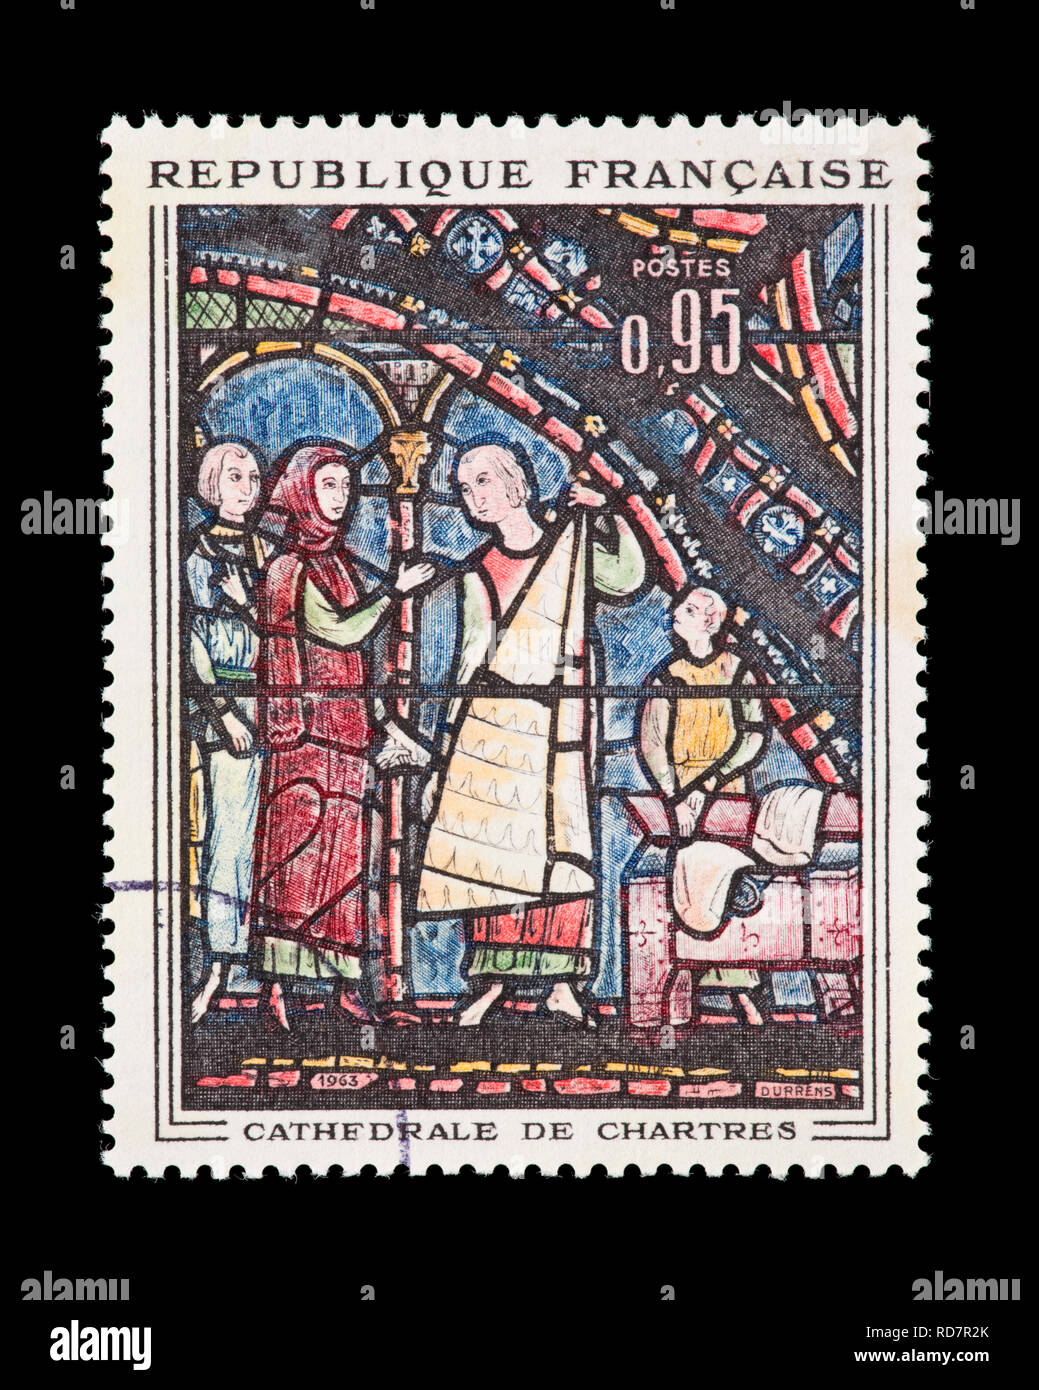 Postage stamp from France depicting the stained glass mosaic 'The Fur Merchants' from Chartres Cathedral. Stock Photo